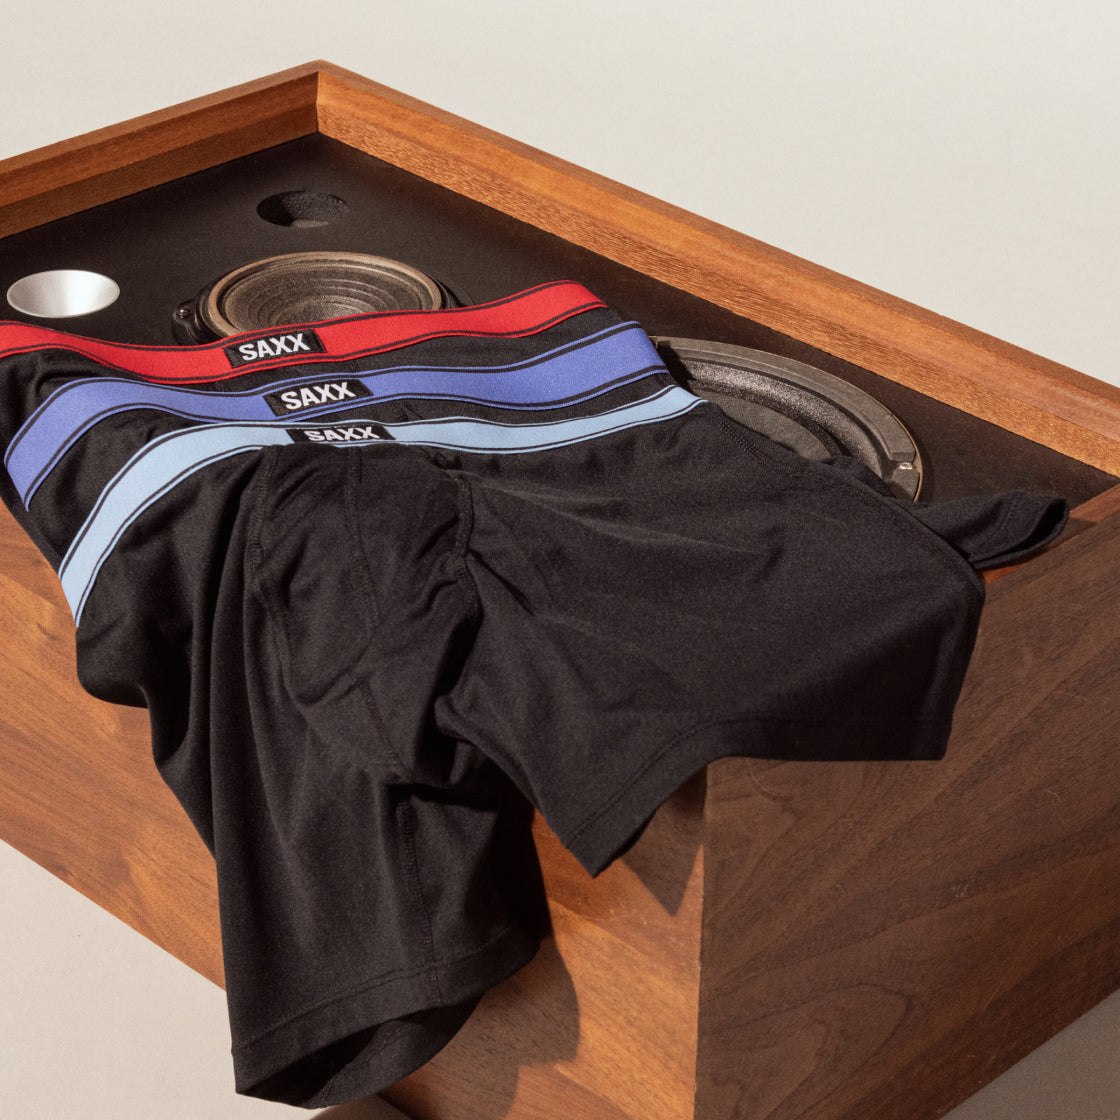 Three pairs of black boxer briefs with waistbands in different colors draped over a wooden speaker